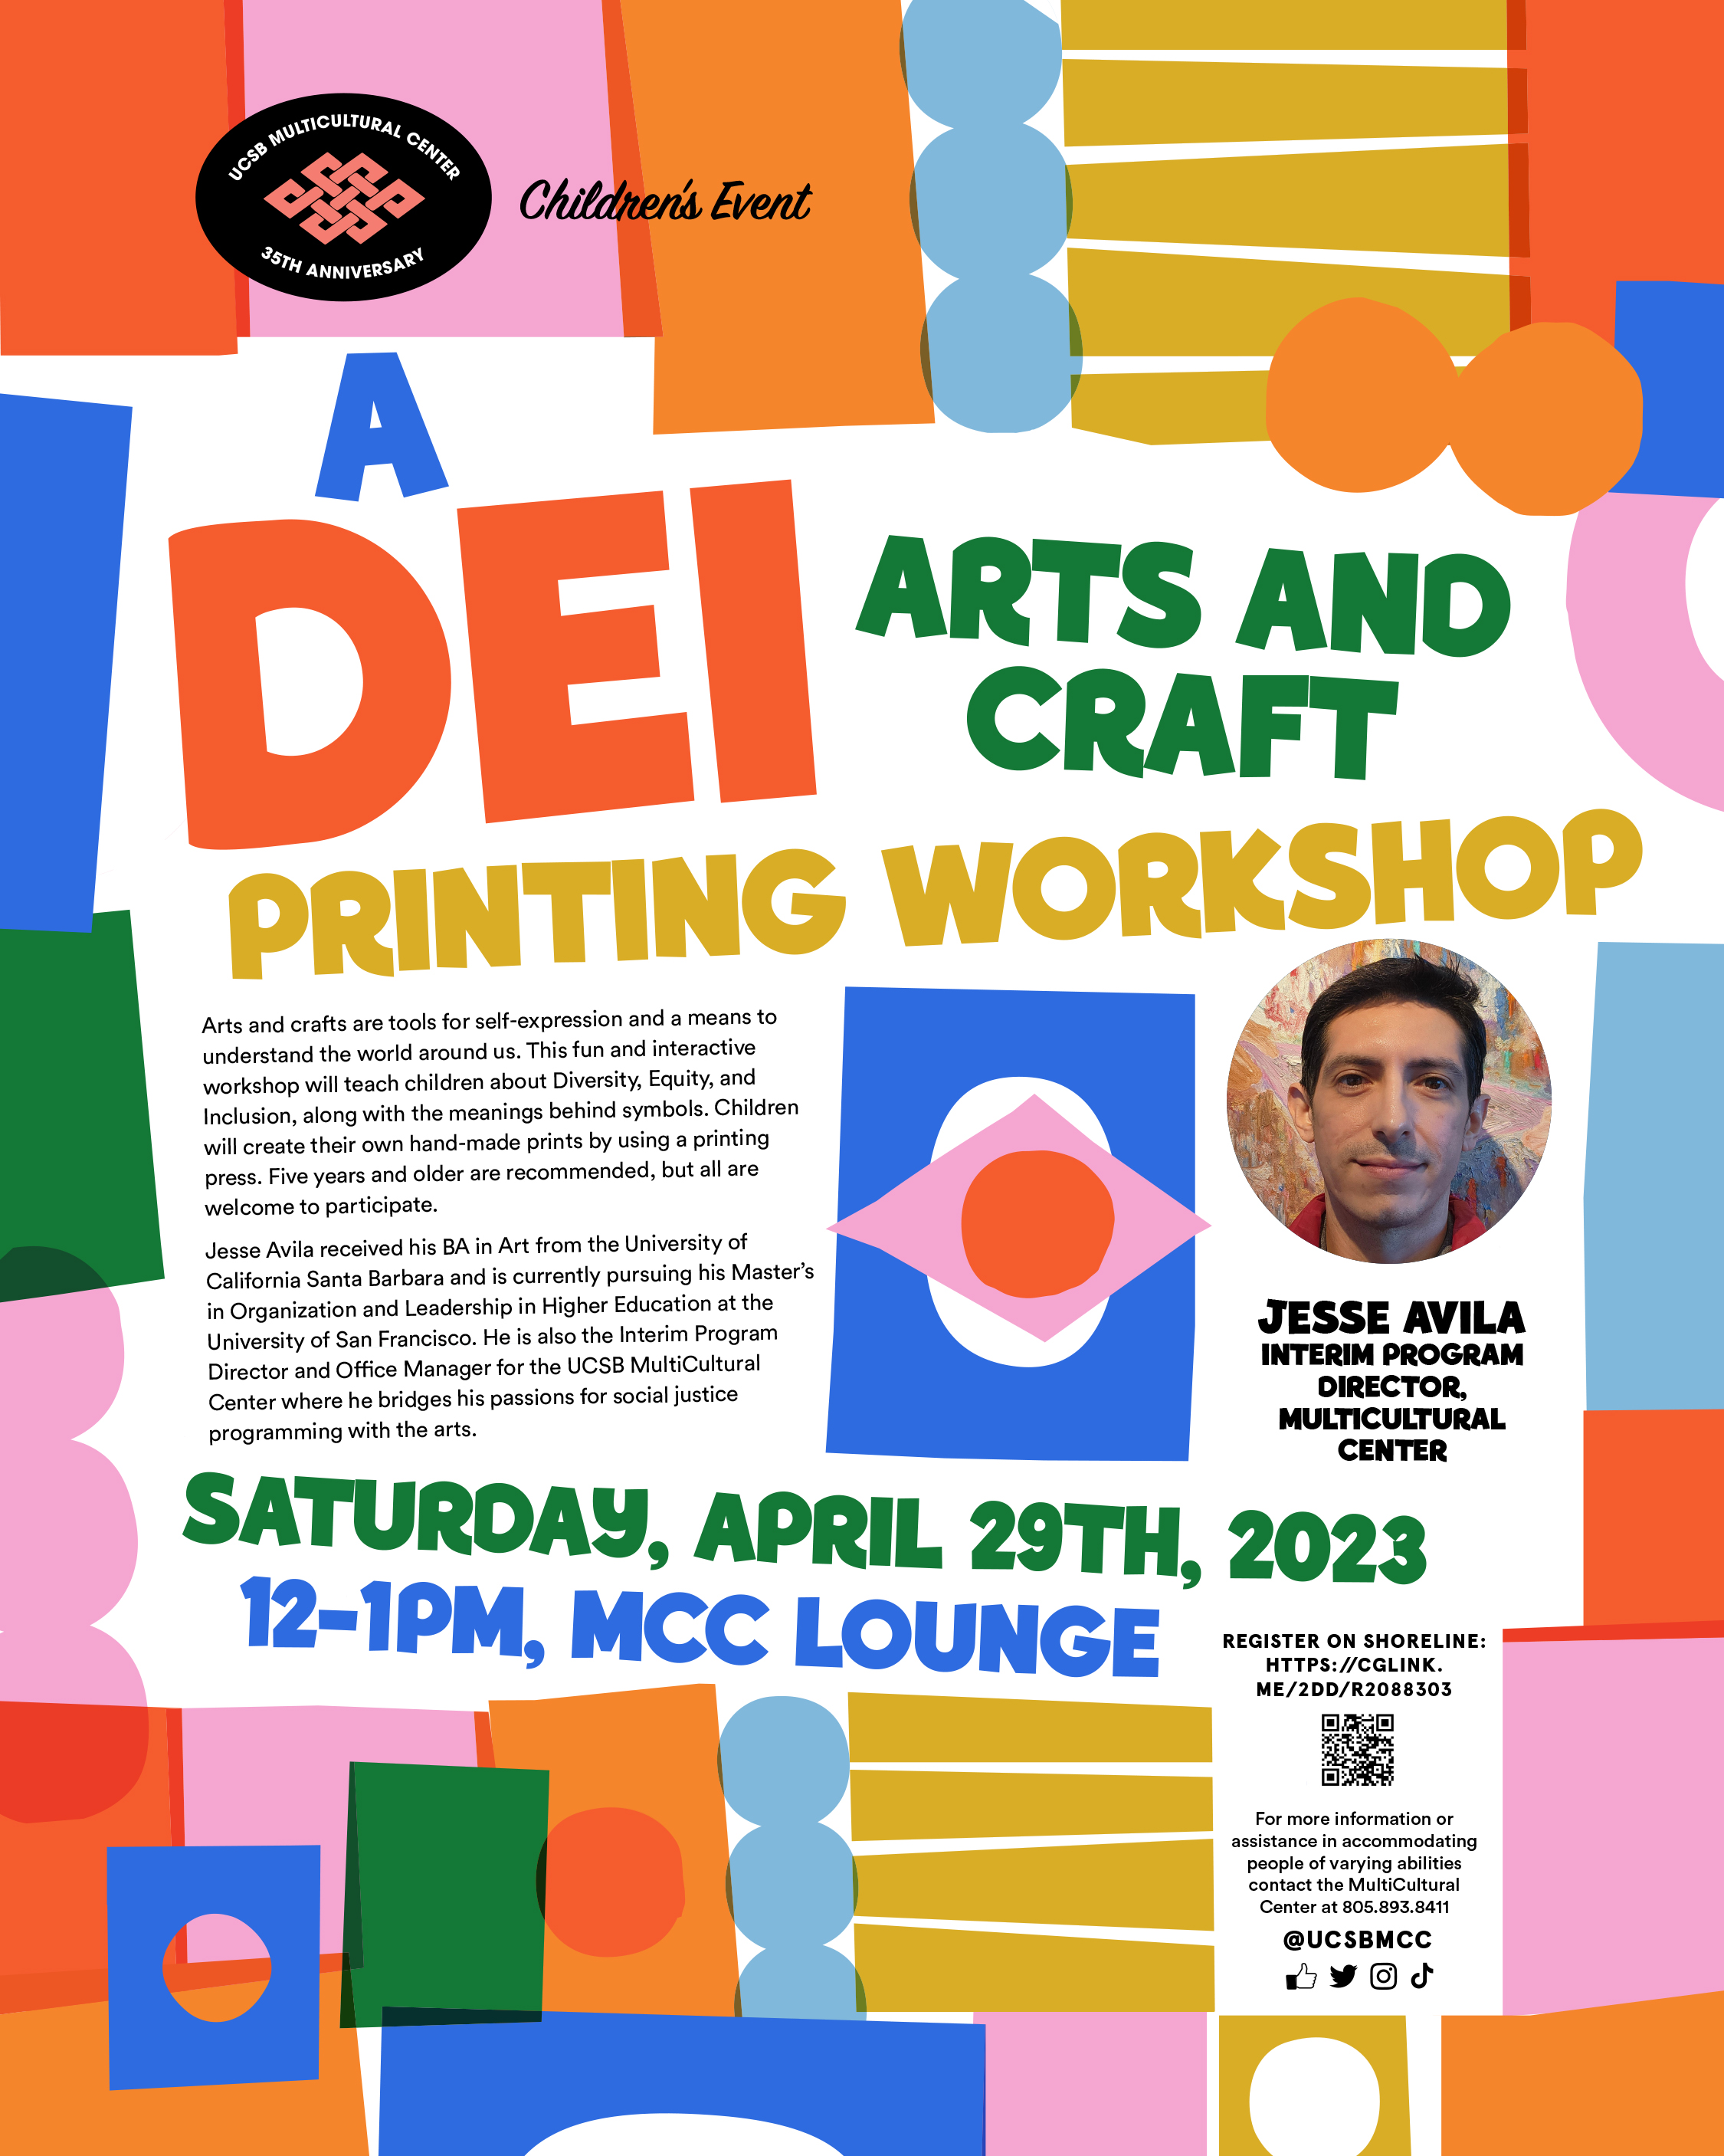 A DEI Arts and Craft Printing Workshop